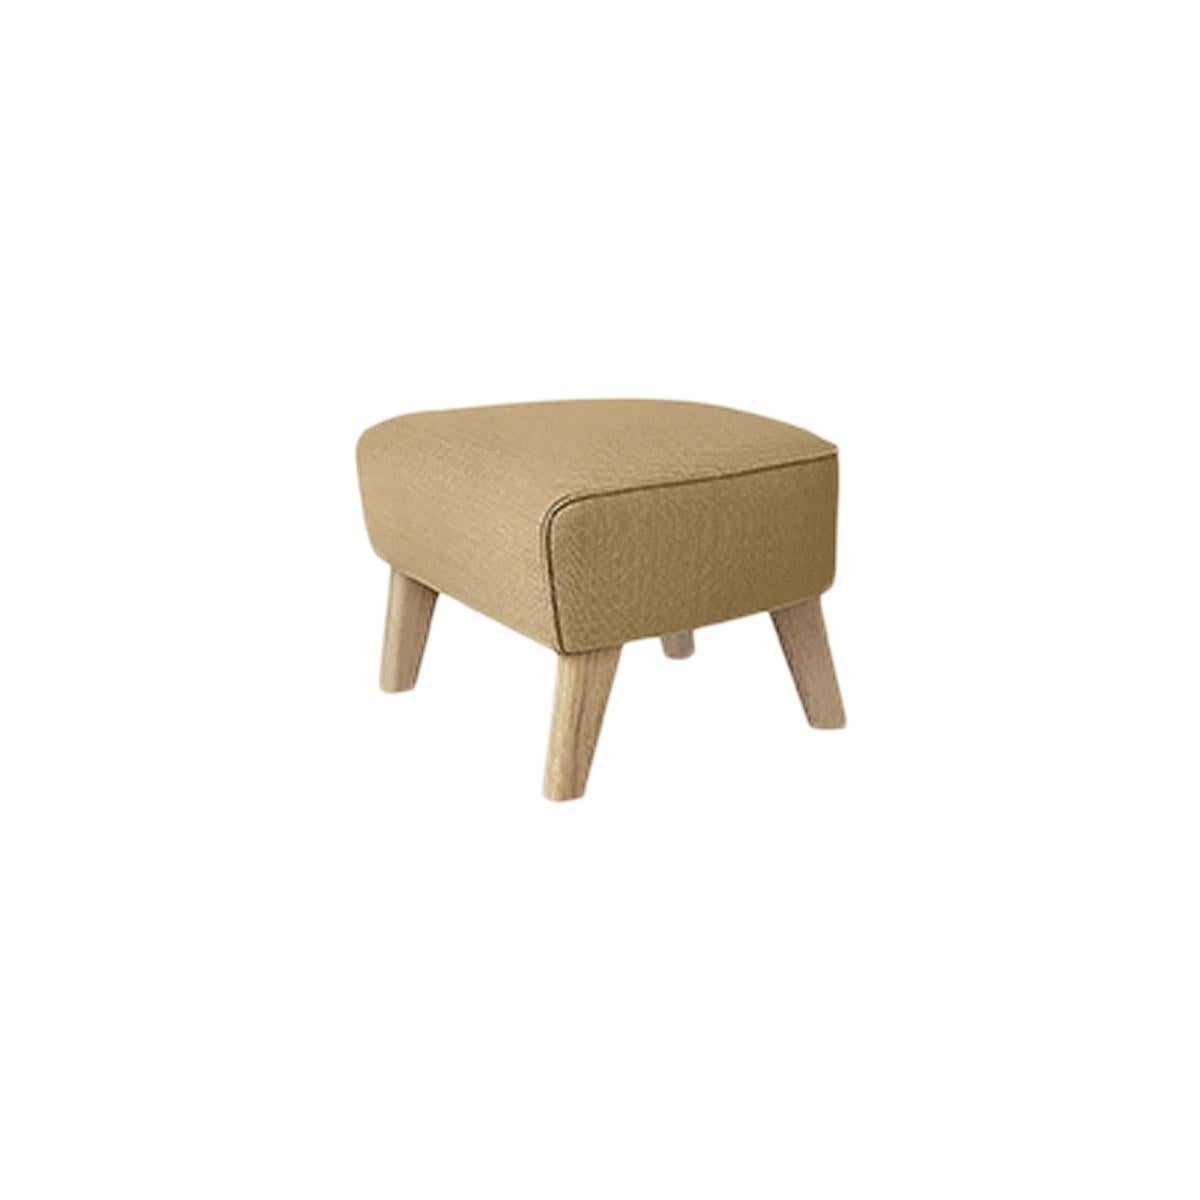 Sand and natural oak Raf Simons Vidar 3 My Own chair footstool by Lassen.
Dimensions: w 56 x d 58 x h 40 cm.
Materials: Textile.
Also available: other colors available.

The My Own Chair footstool has been designed in the same spirit as